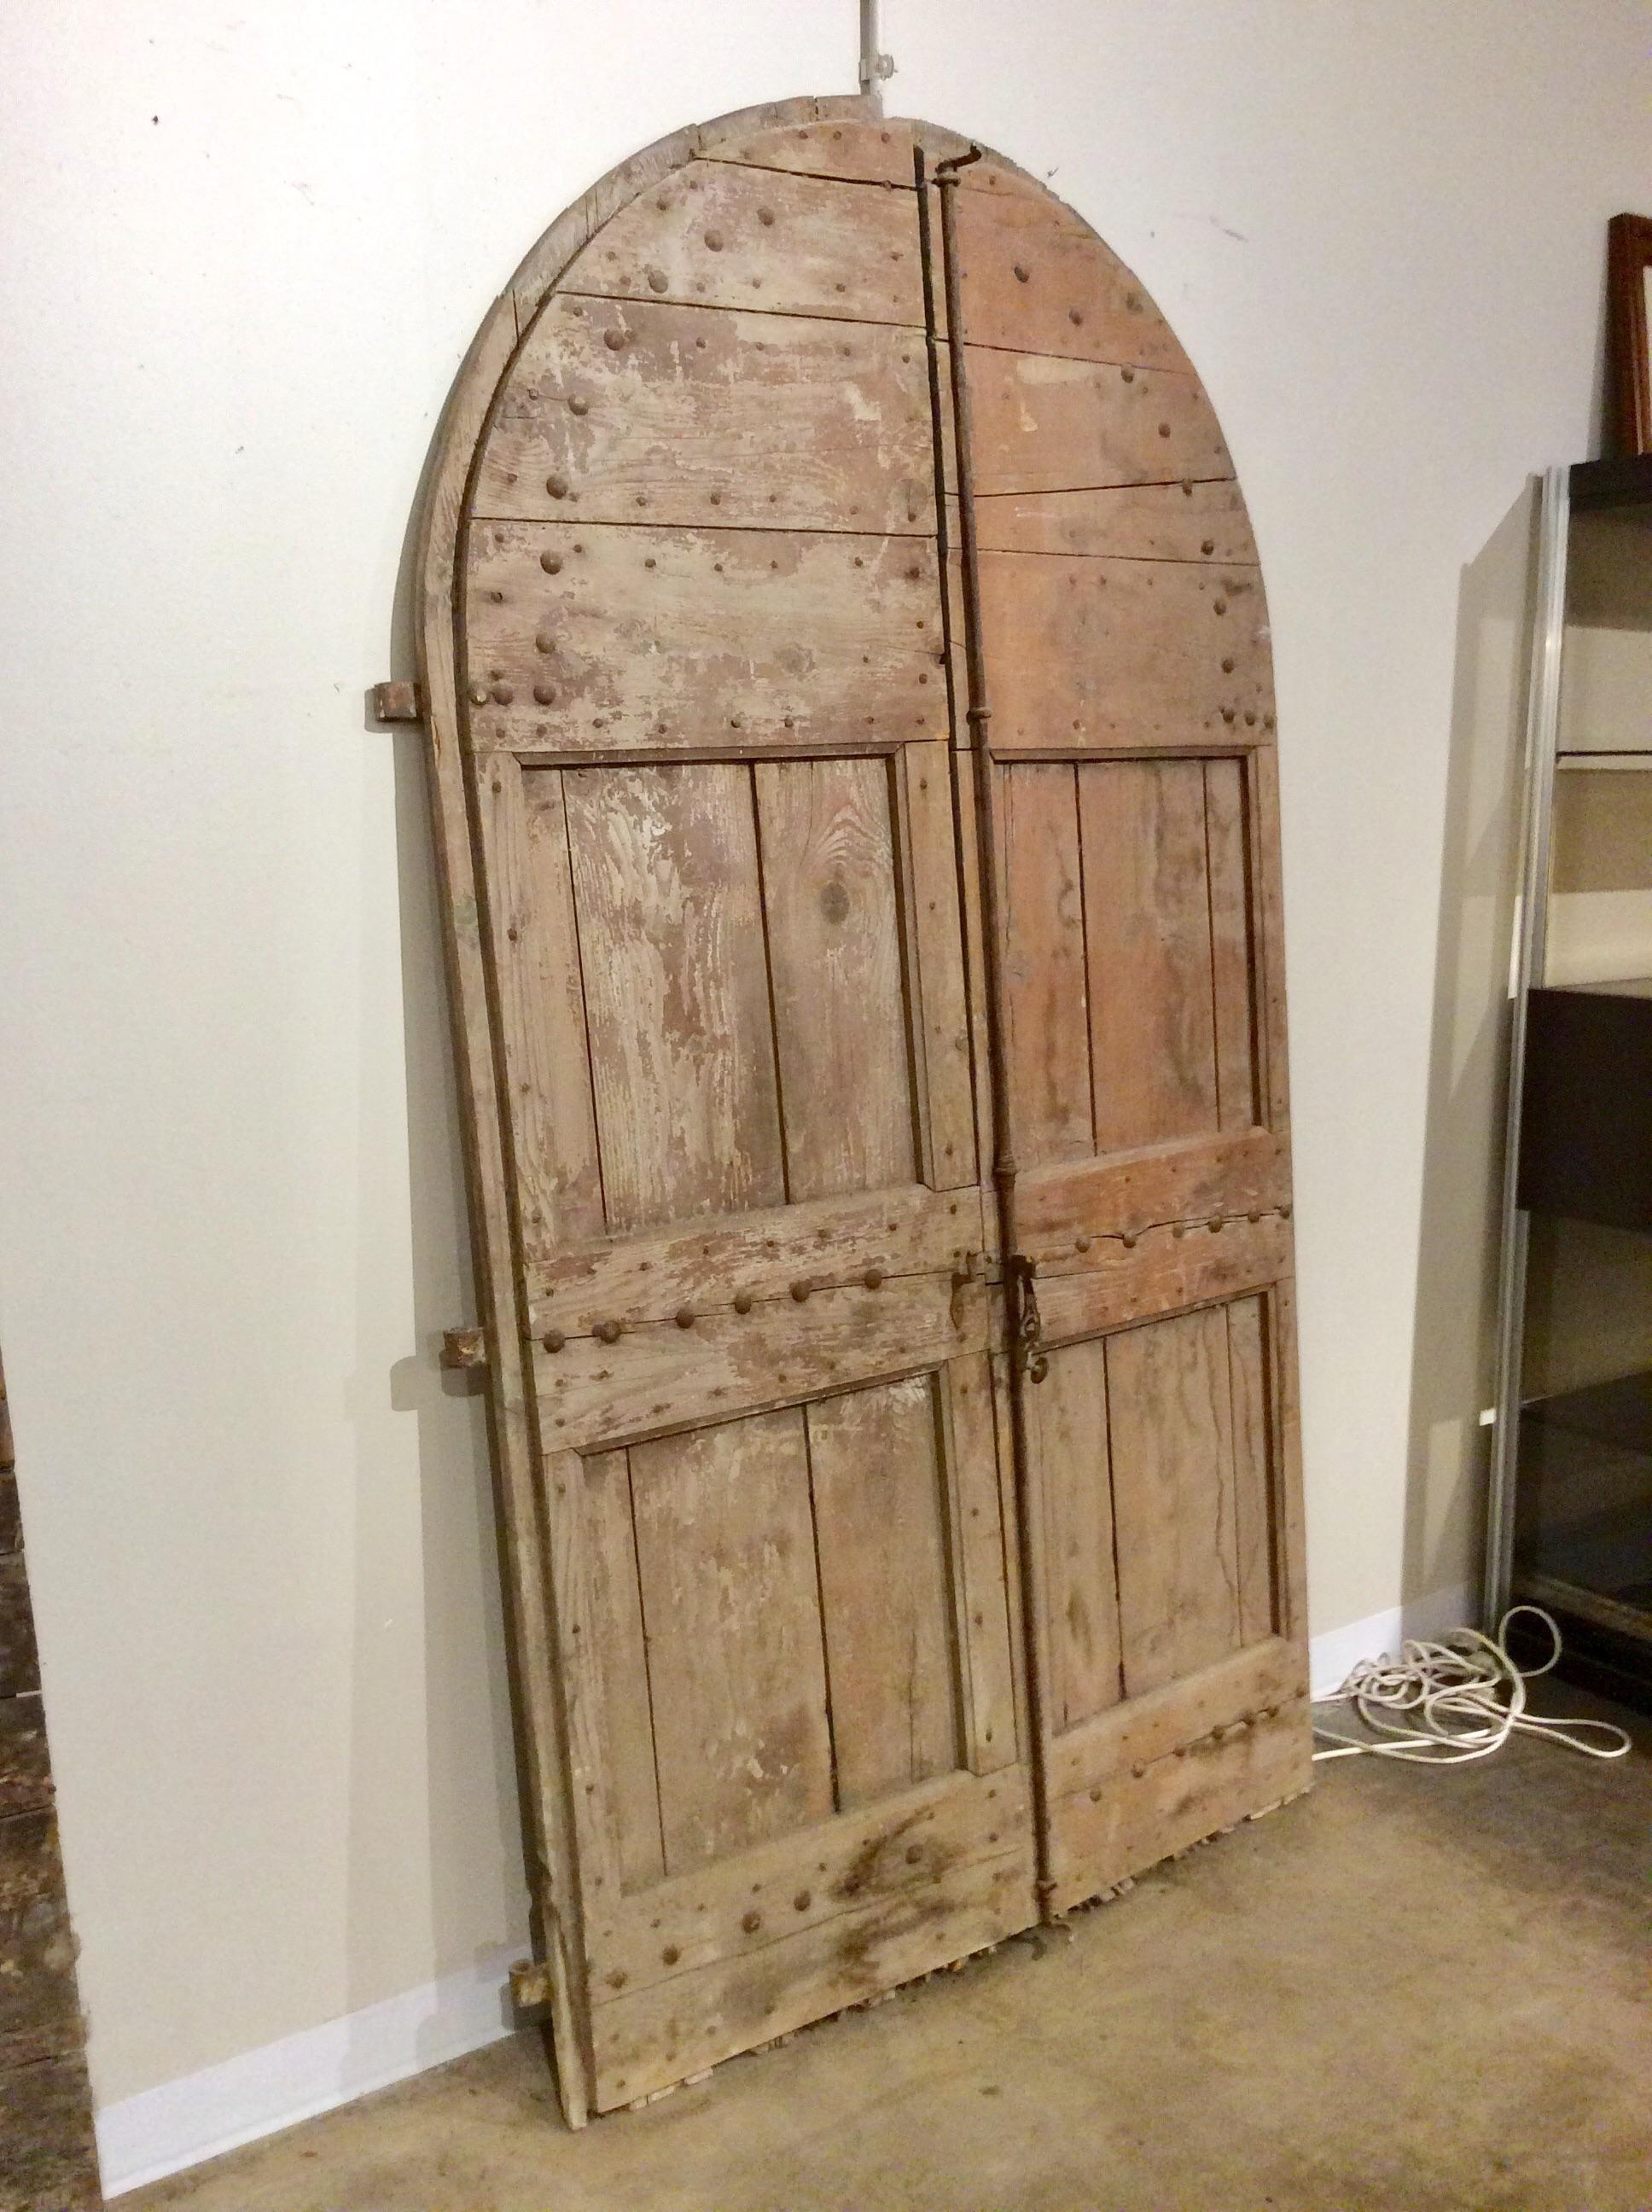 Found in the South of France, these monumental Early 1800s French Arched Wood Doors were salvaged from a 19th century French chateau. They would have been on the ground floor, attached to the building. Each door is made of pine and retain most of